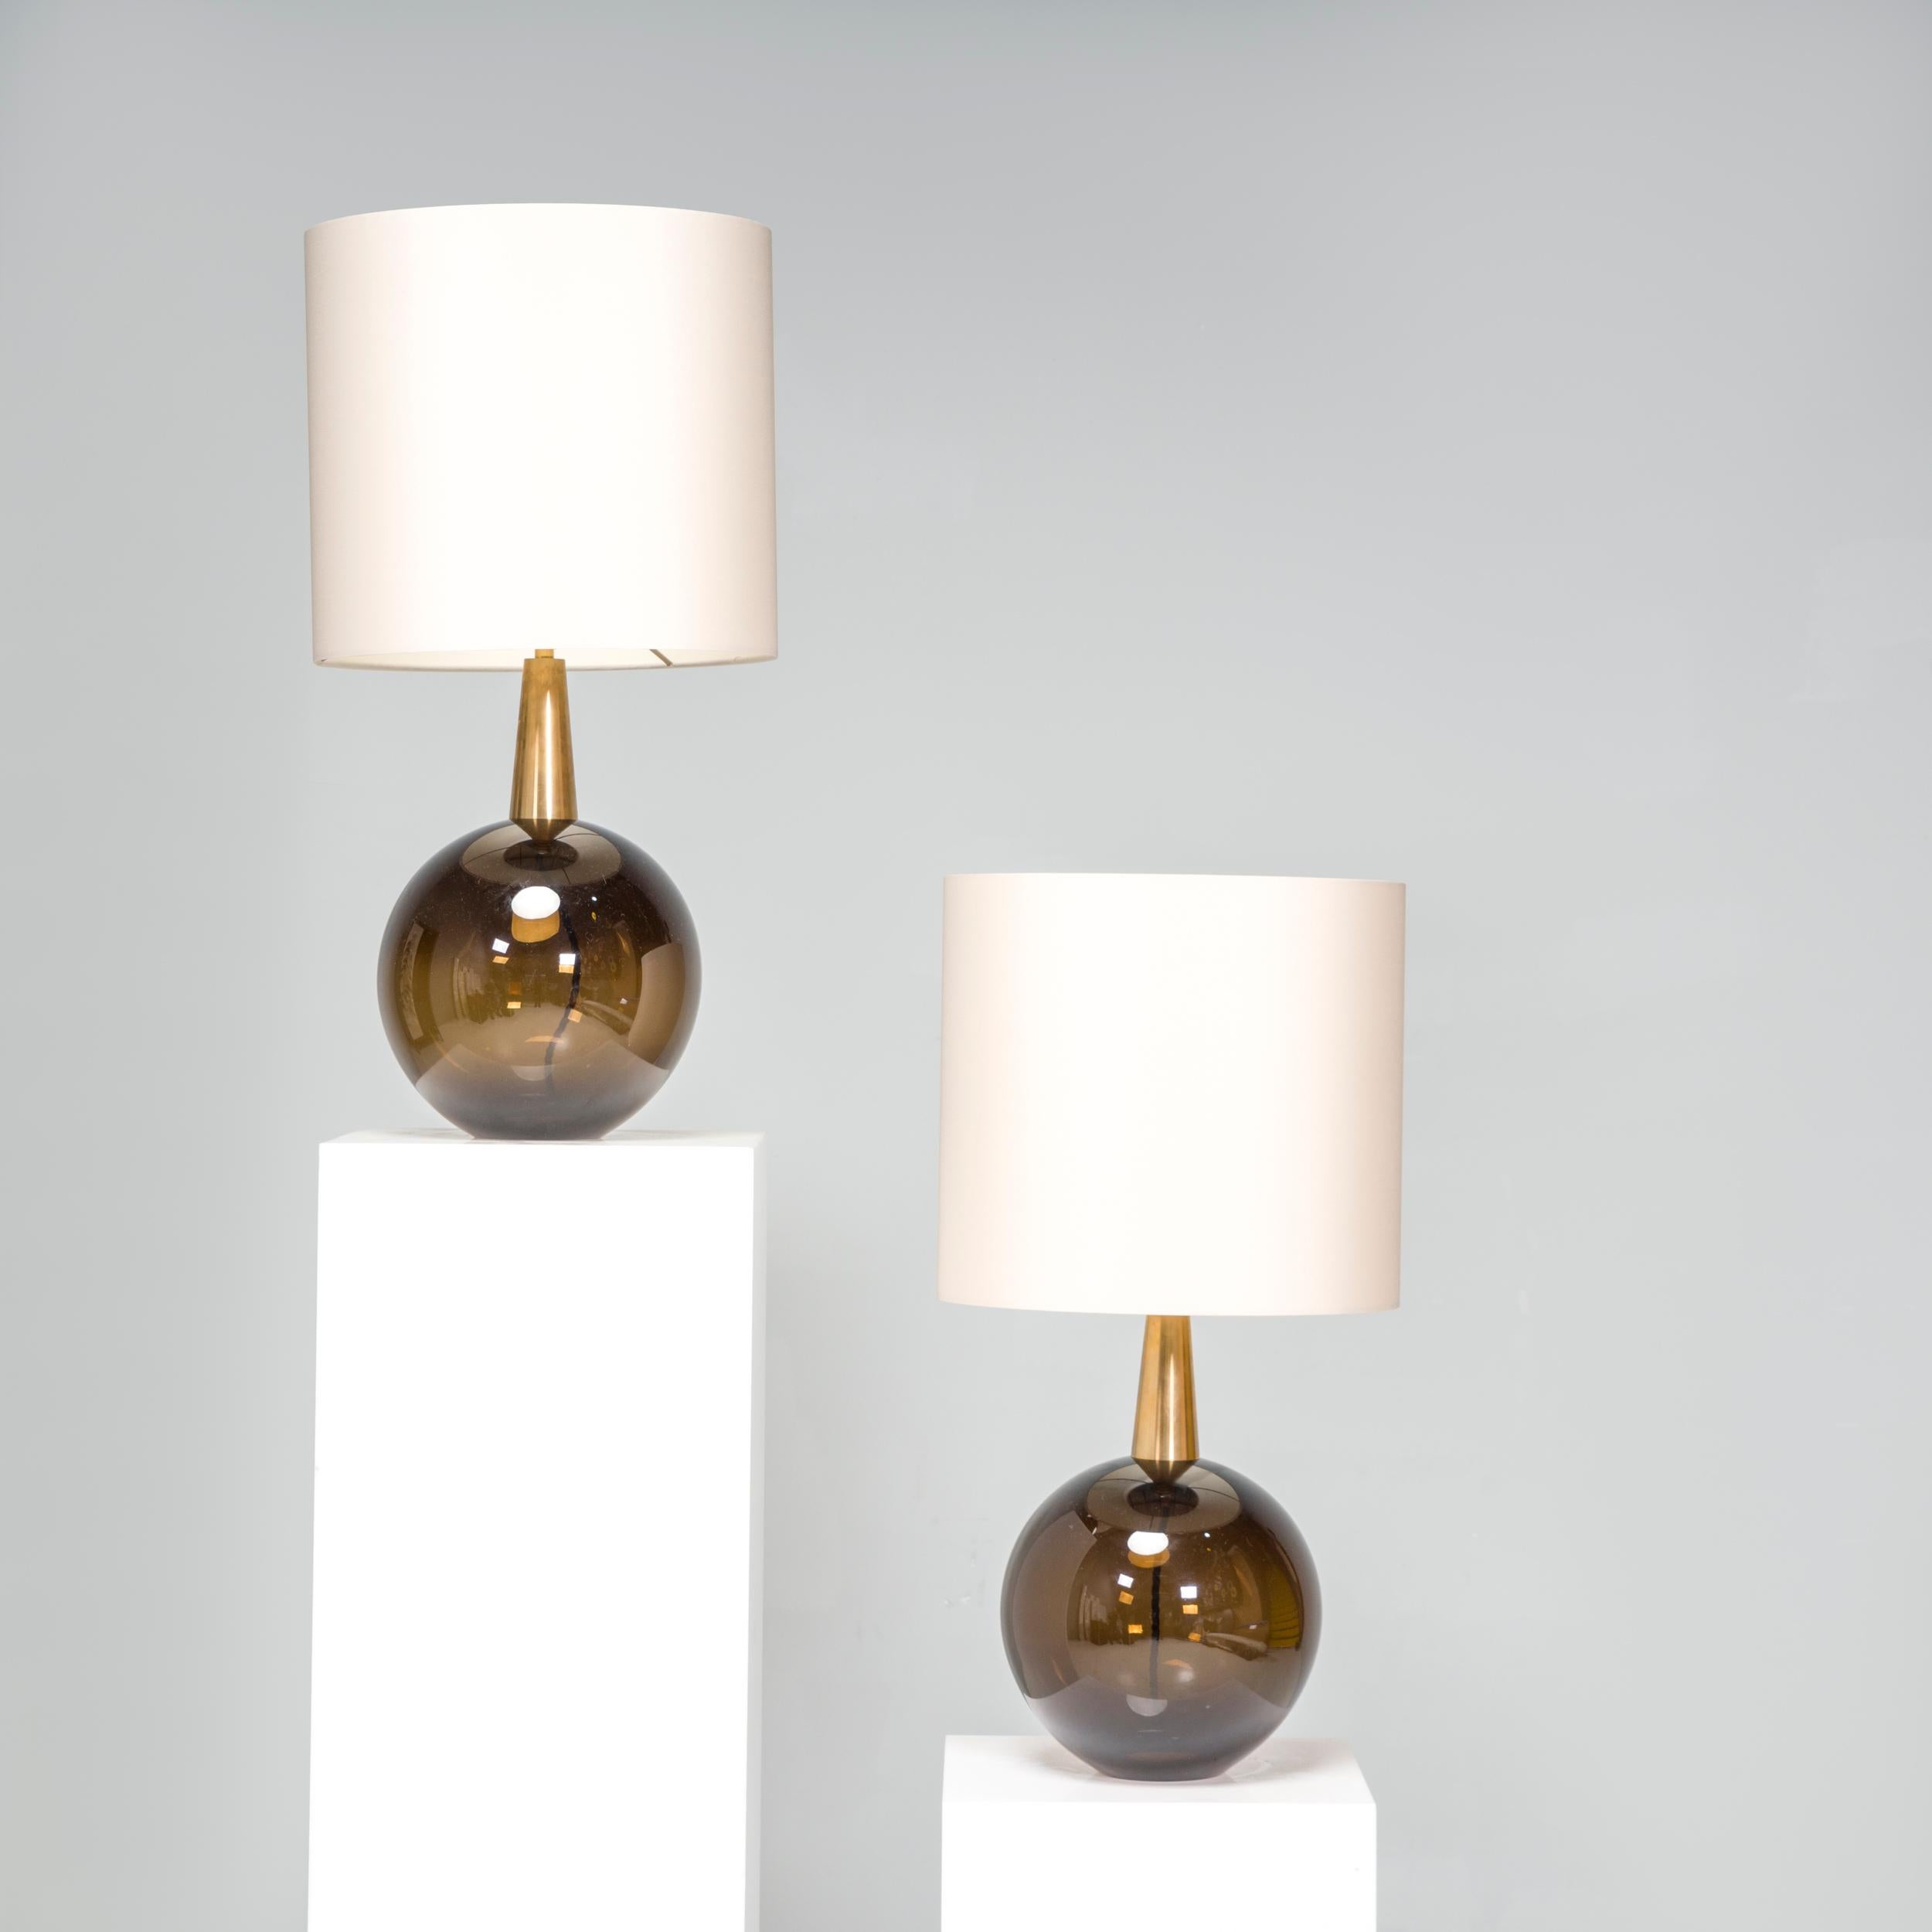 Porta Romana was founded by Andrew and Sarah Hills in 1988; their lighting is manufactured in Britain in collaboration with local artisans.  Featuring cedar brown glass bases in a sleek hourglass silhouette, the Bishop lamps have brass accents and